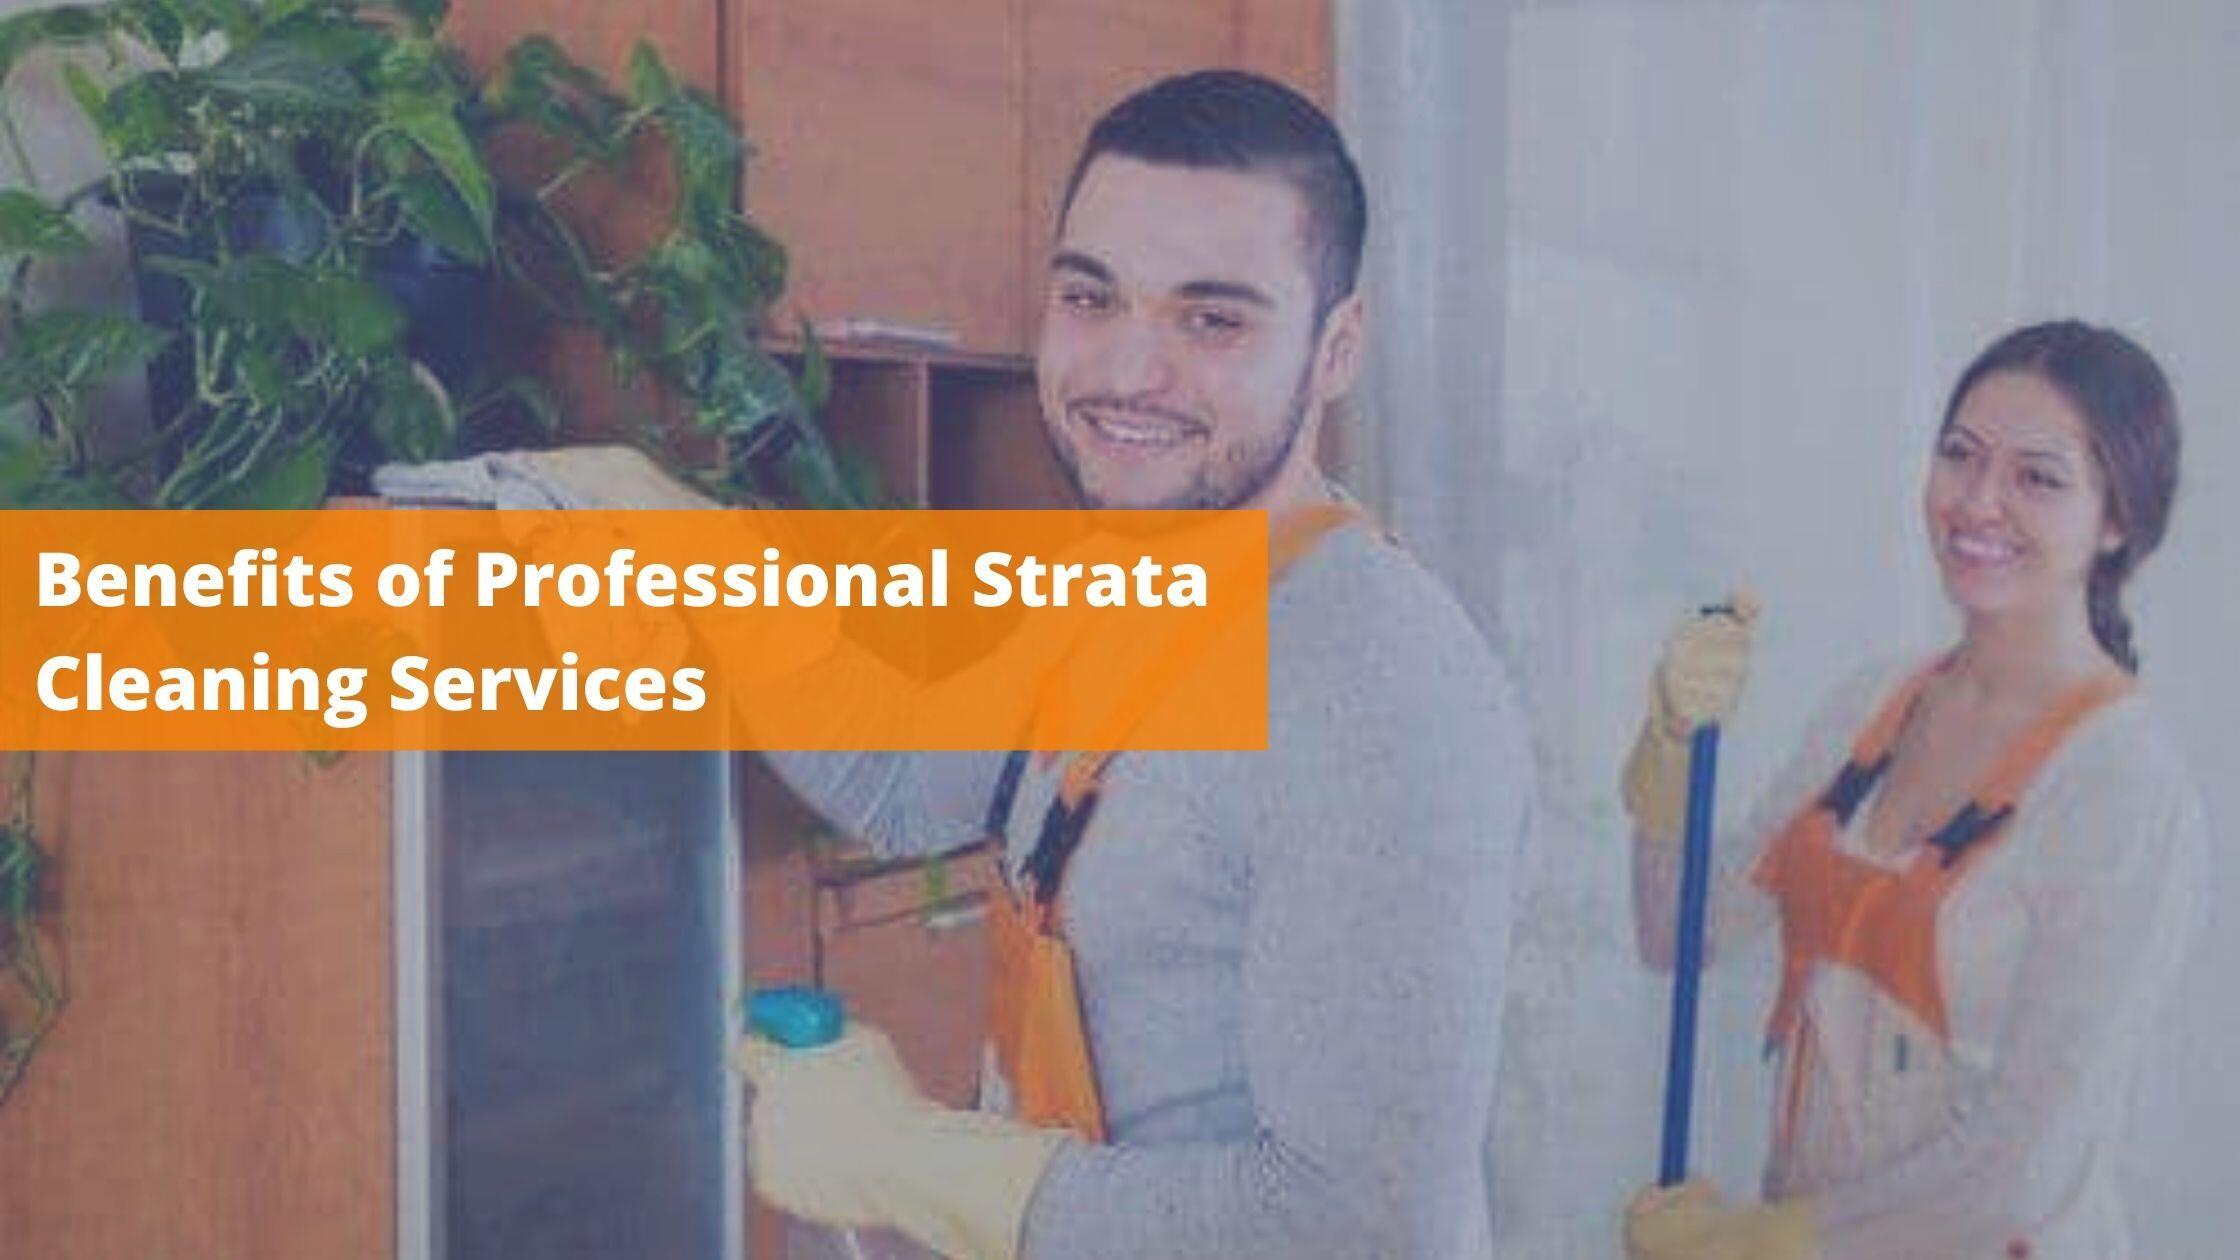 Benefits of Professional Strata Cleaning Services